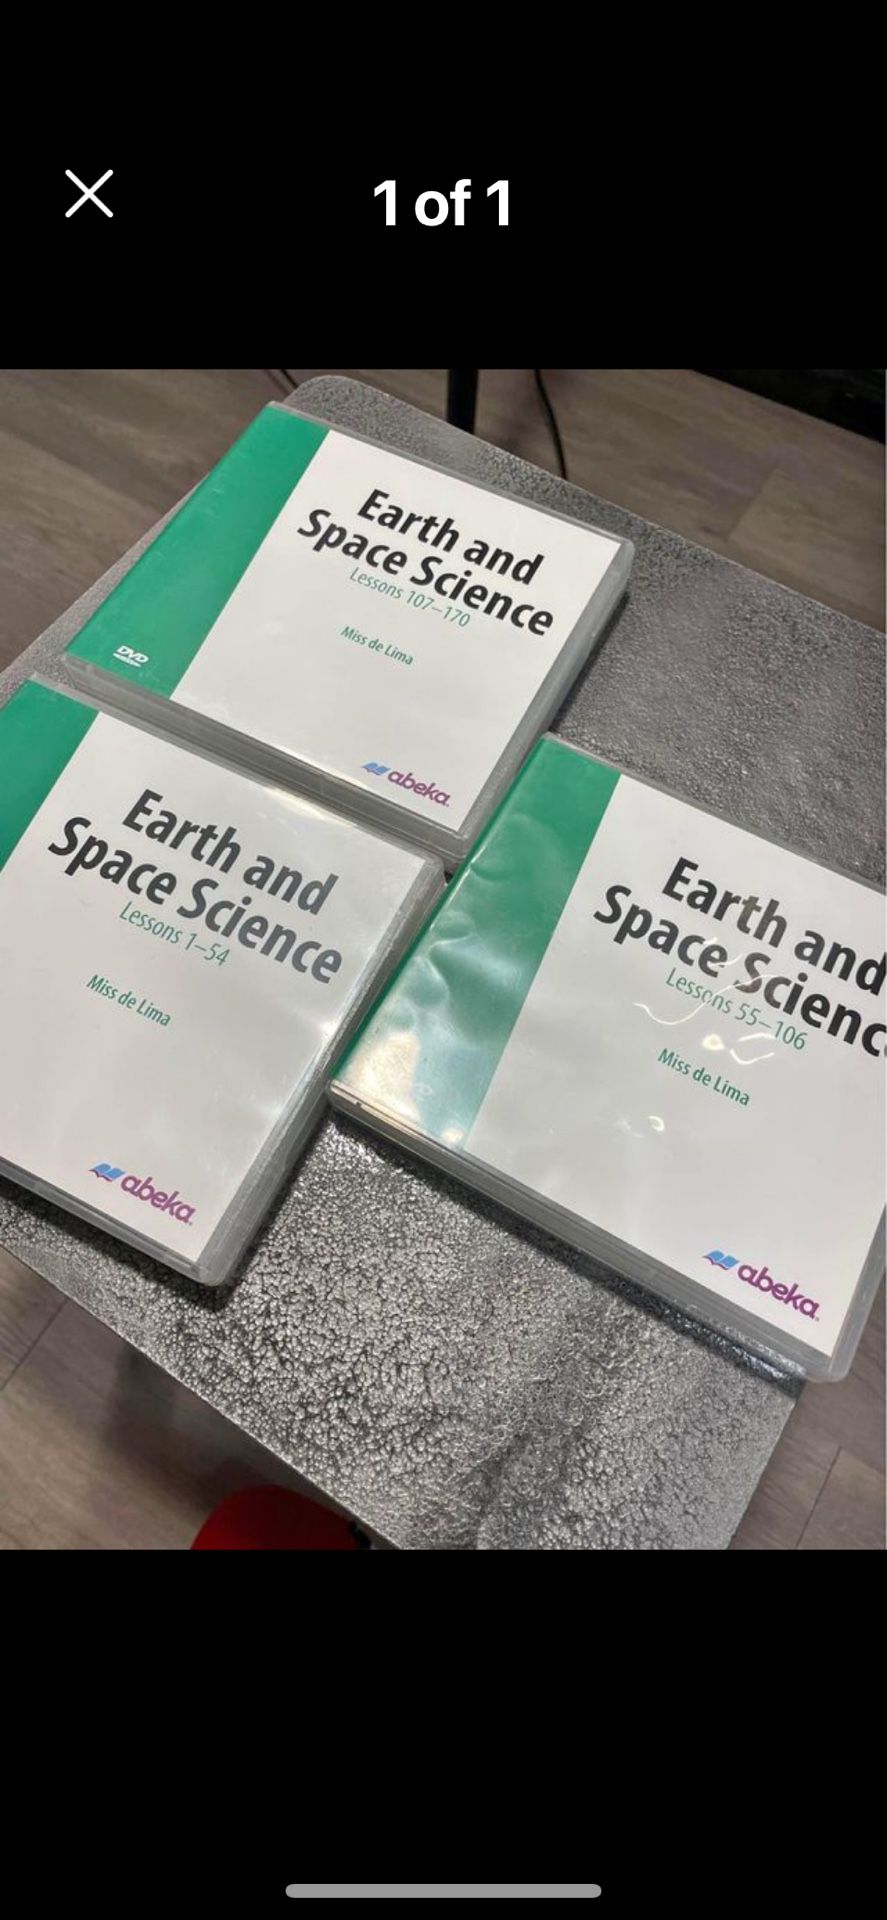 Abeka Dvds 8th Grade 0-170 Full Set Science earth And Space 